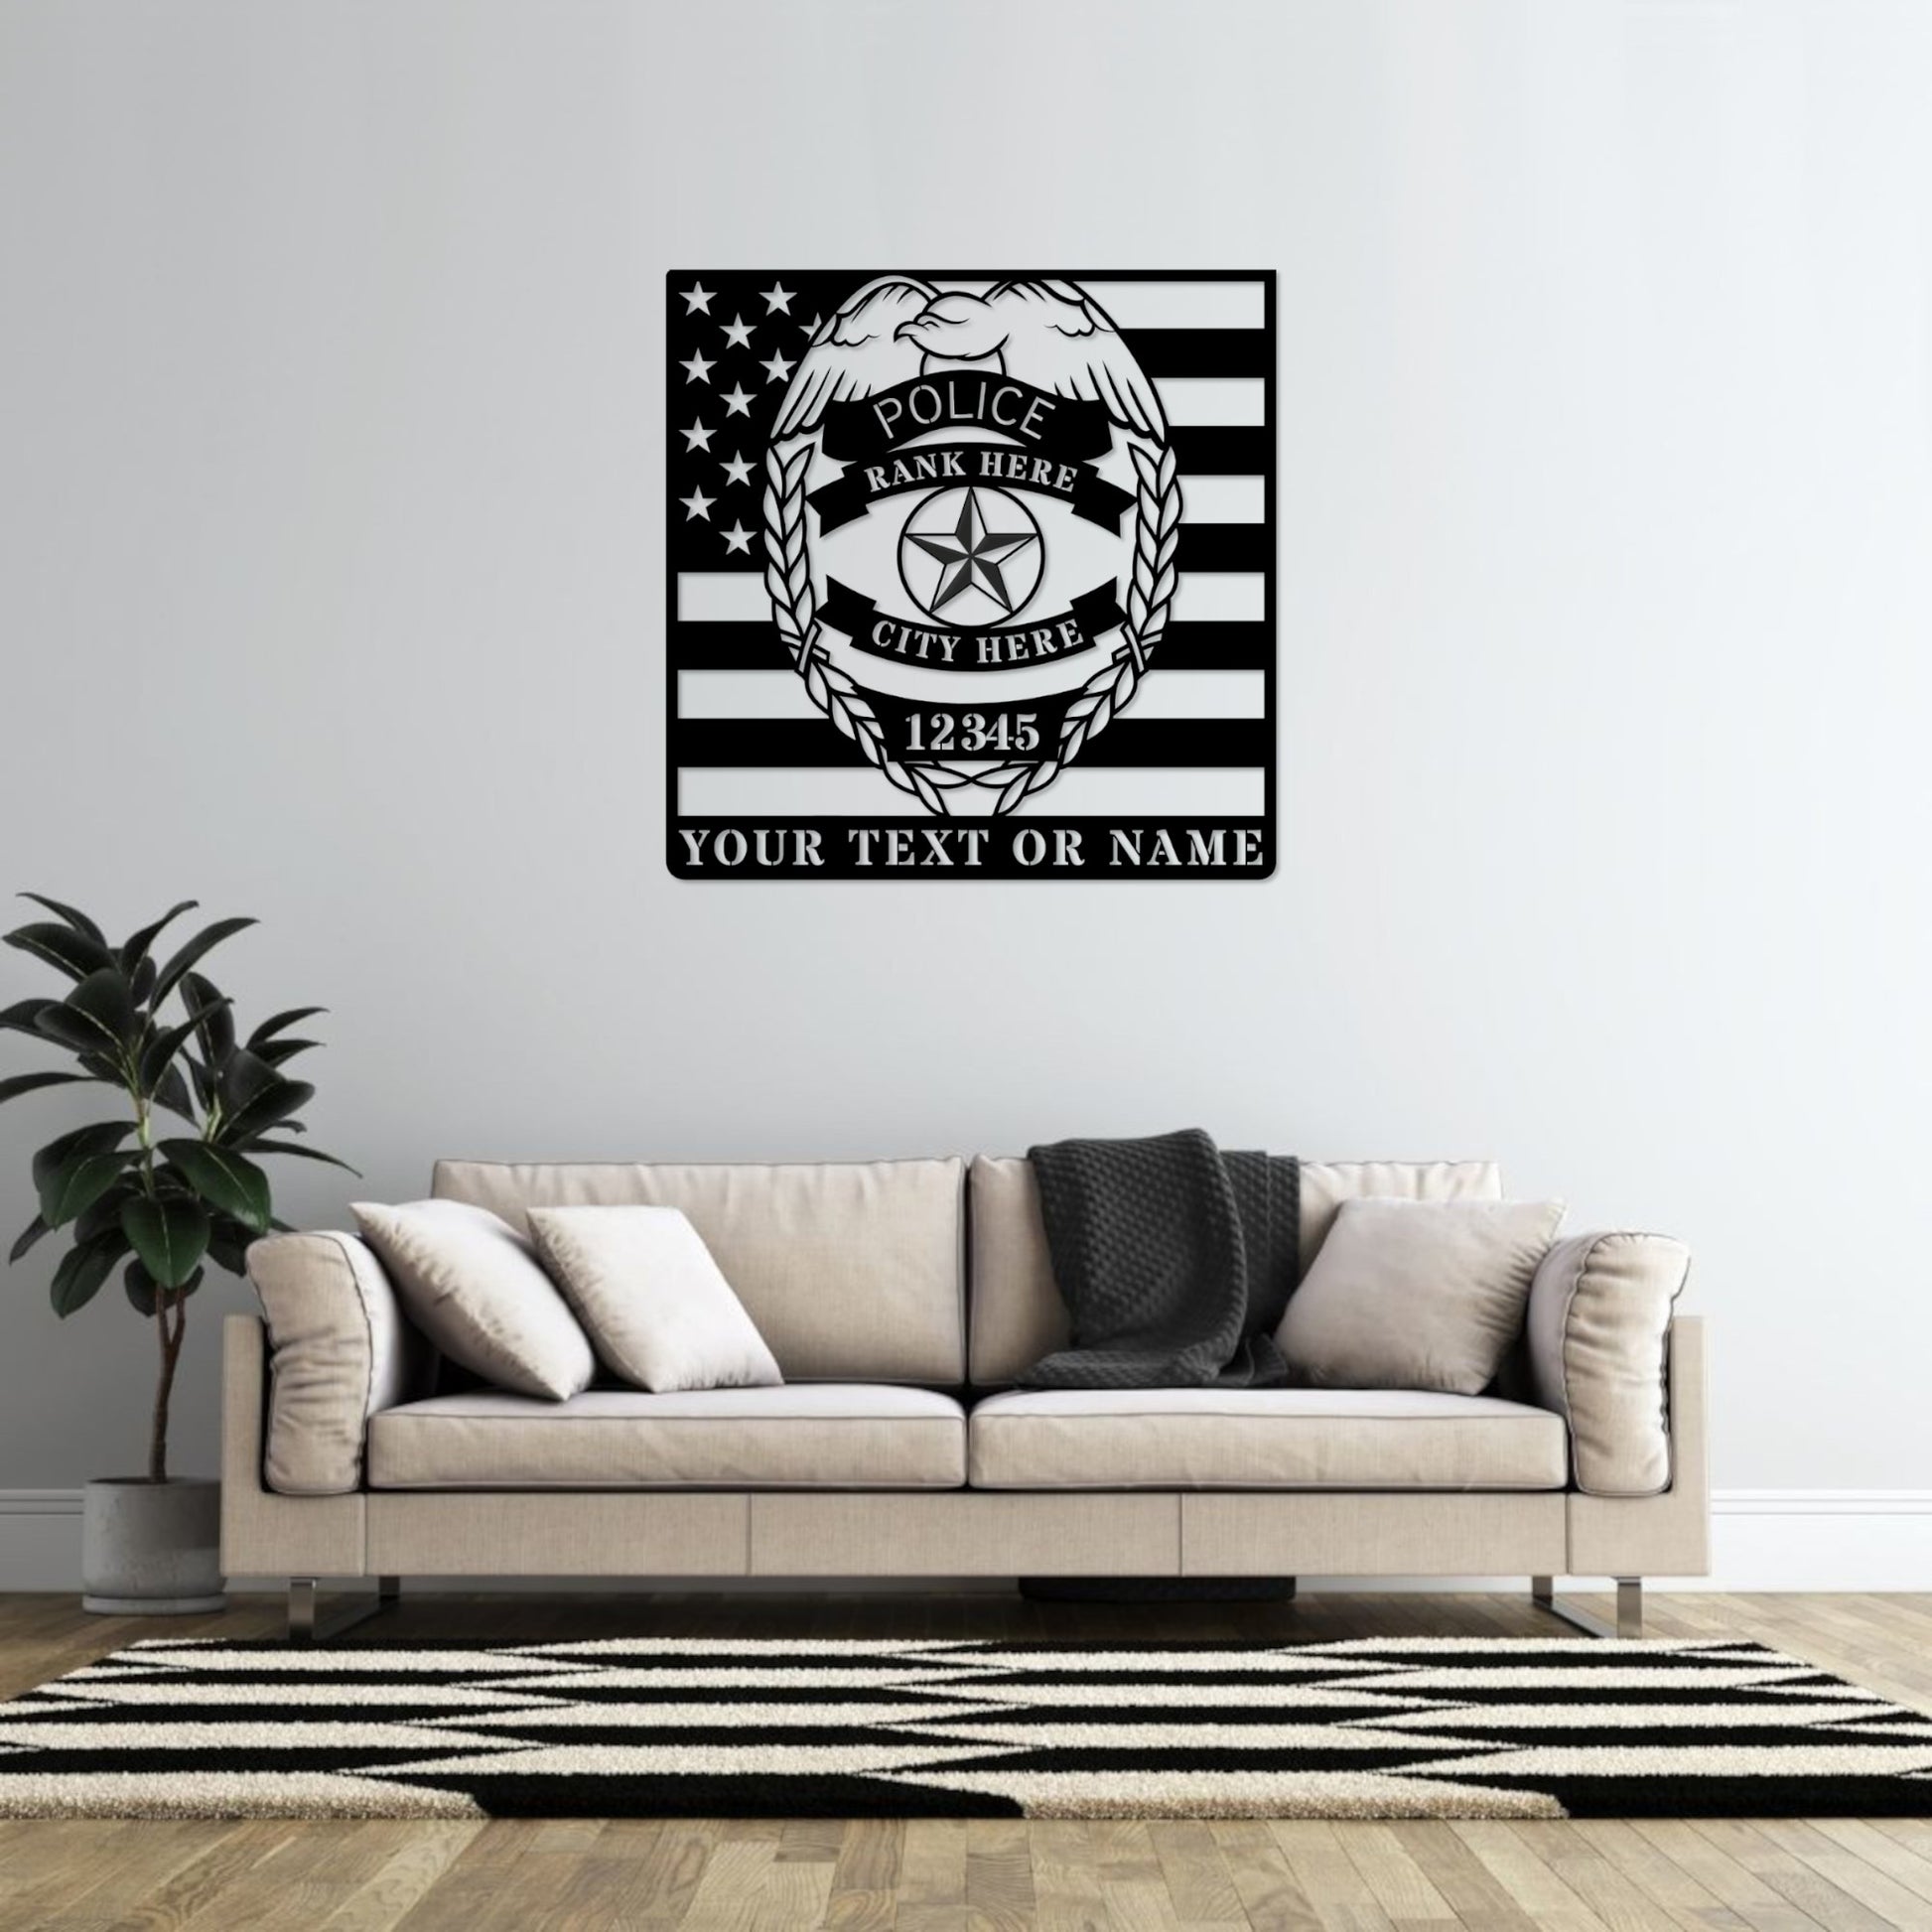 Personalized Police Badge Name Metal Sign Gift. Customizable Police Force Wall Decor. Police Officer Gift. Police Lieutenant Badge. Cop Gift